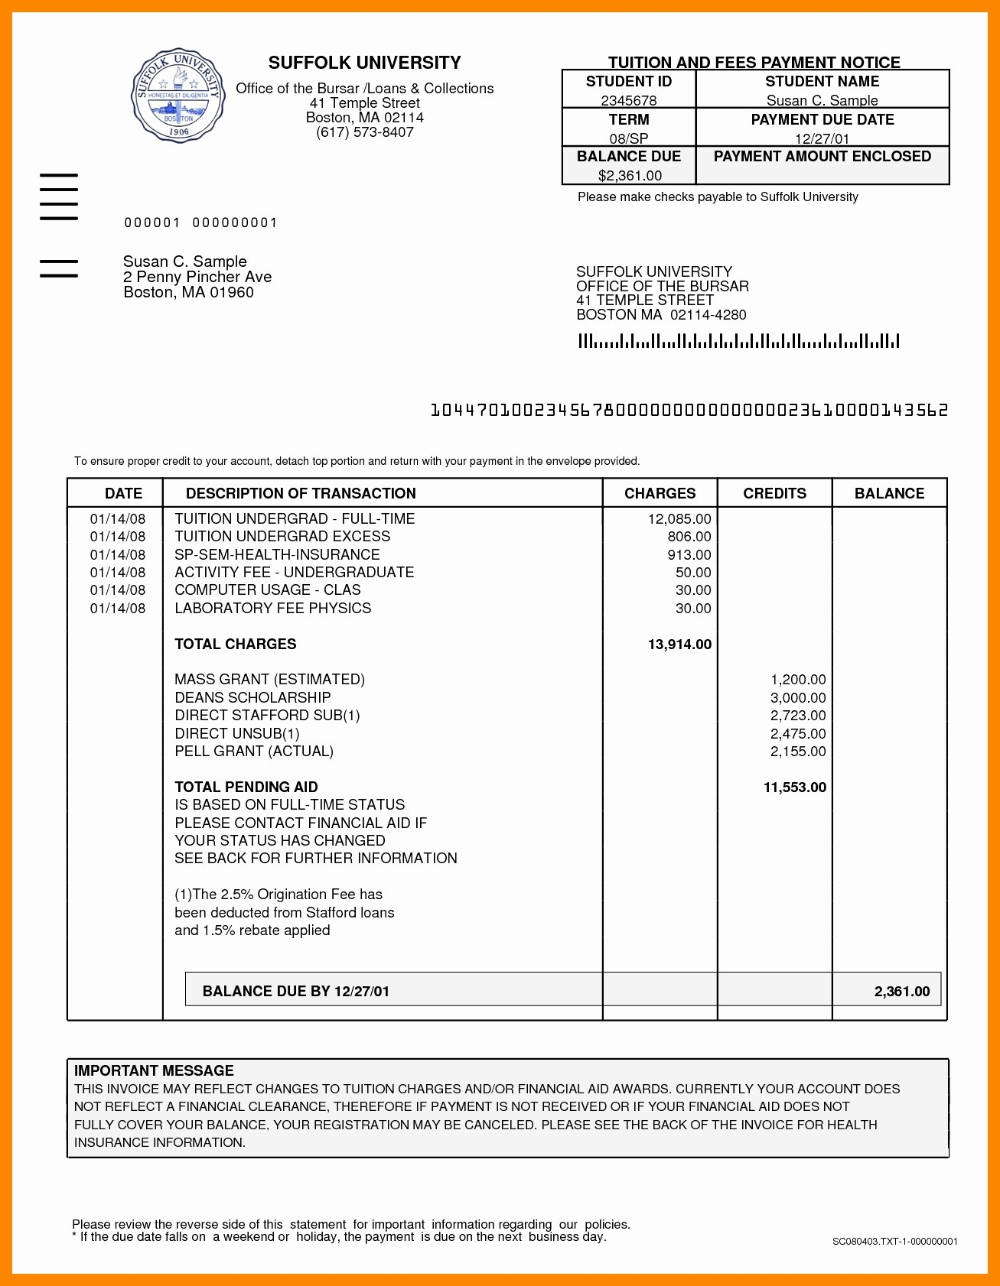 Sample Legal Invoice Template Letsgonepal With Solicitors throughout Solicitors Invoice Template